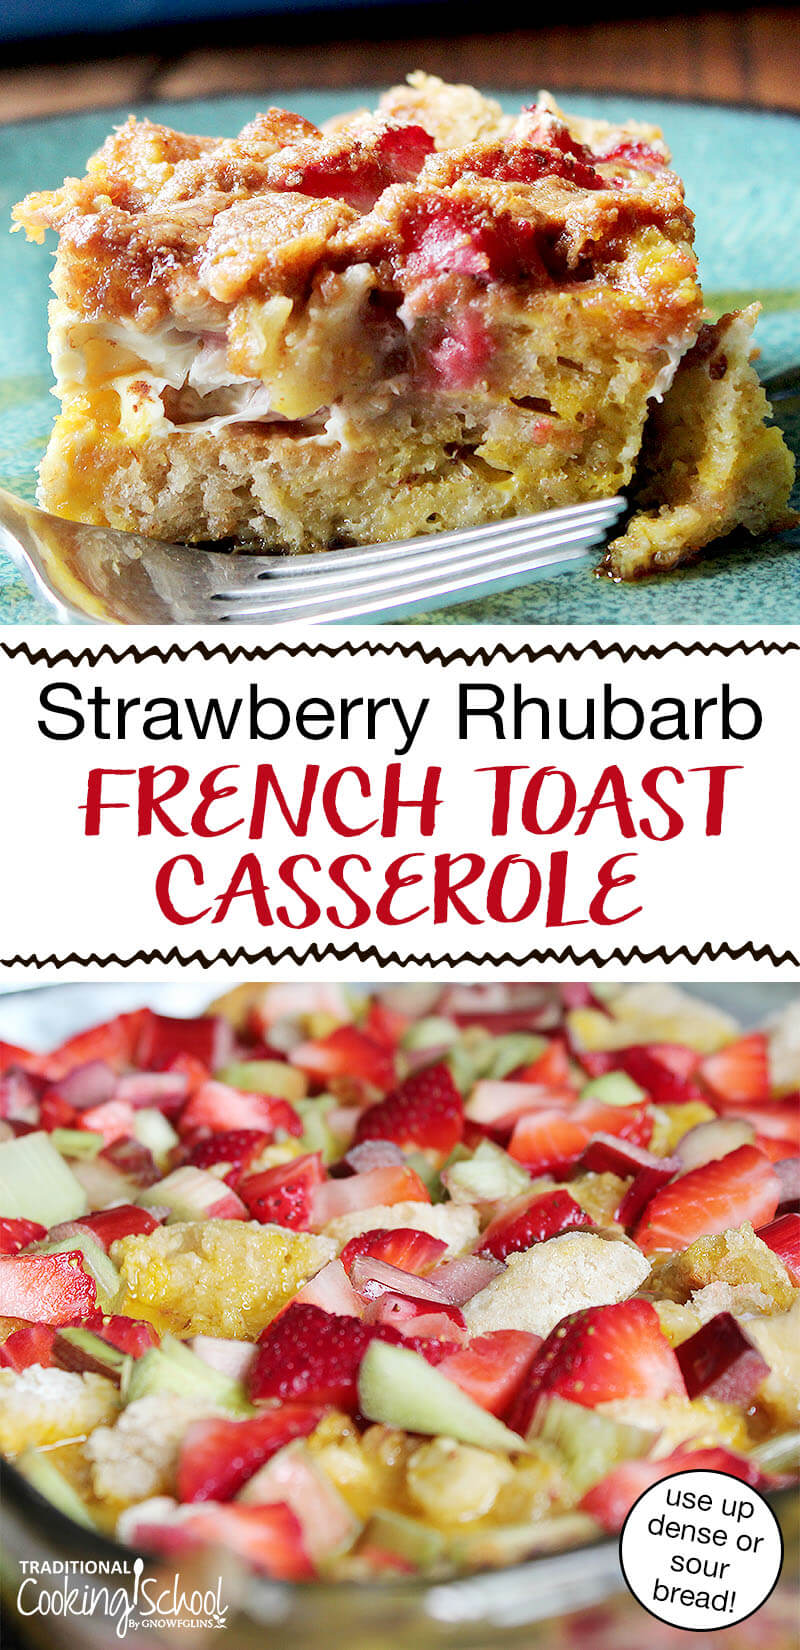 photo collage of making sweet breakfast casserole plus a photo of a finished slice, with text overlay: "Strawberry Rhubarb French Toast Casserole (use up dense or sour bread!)"